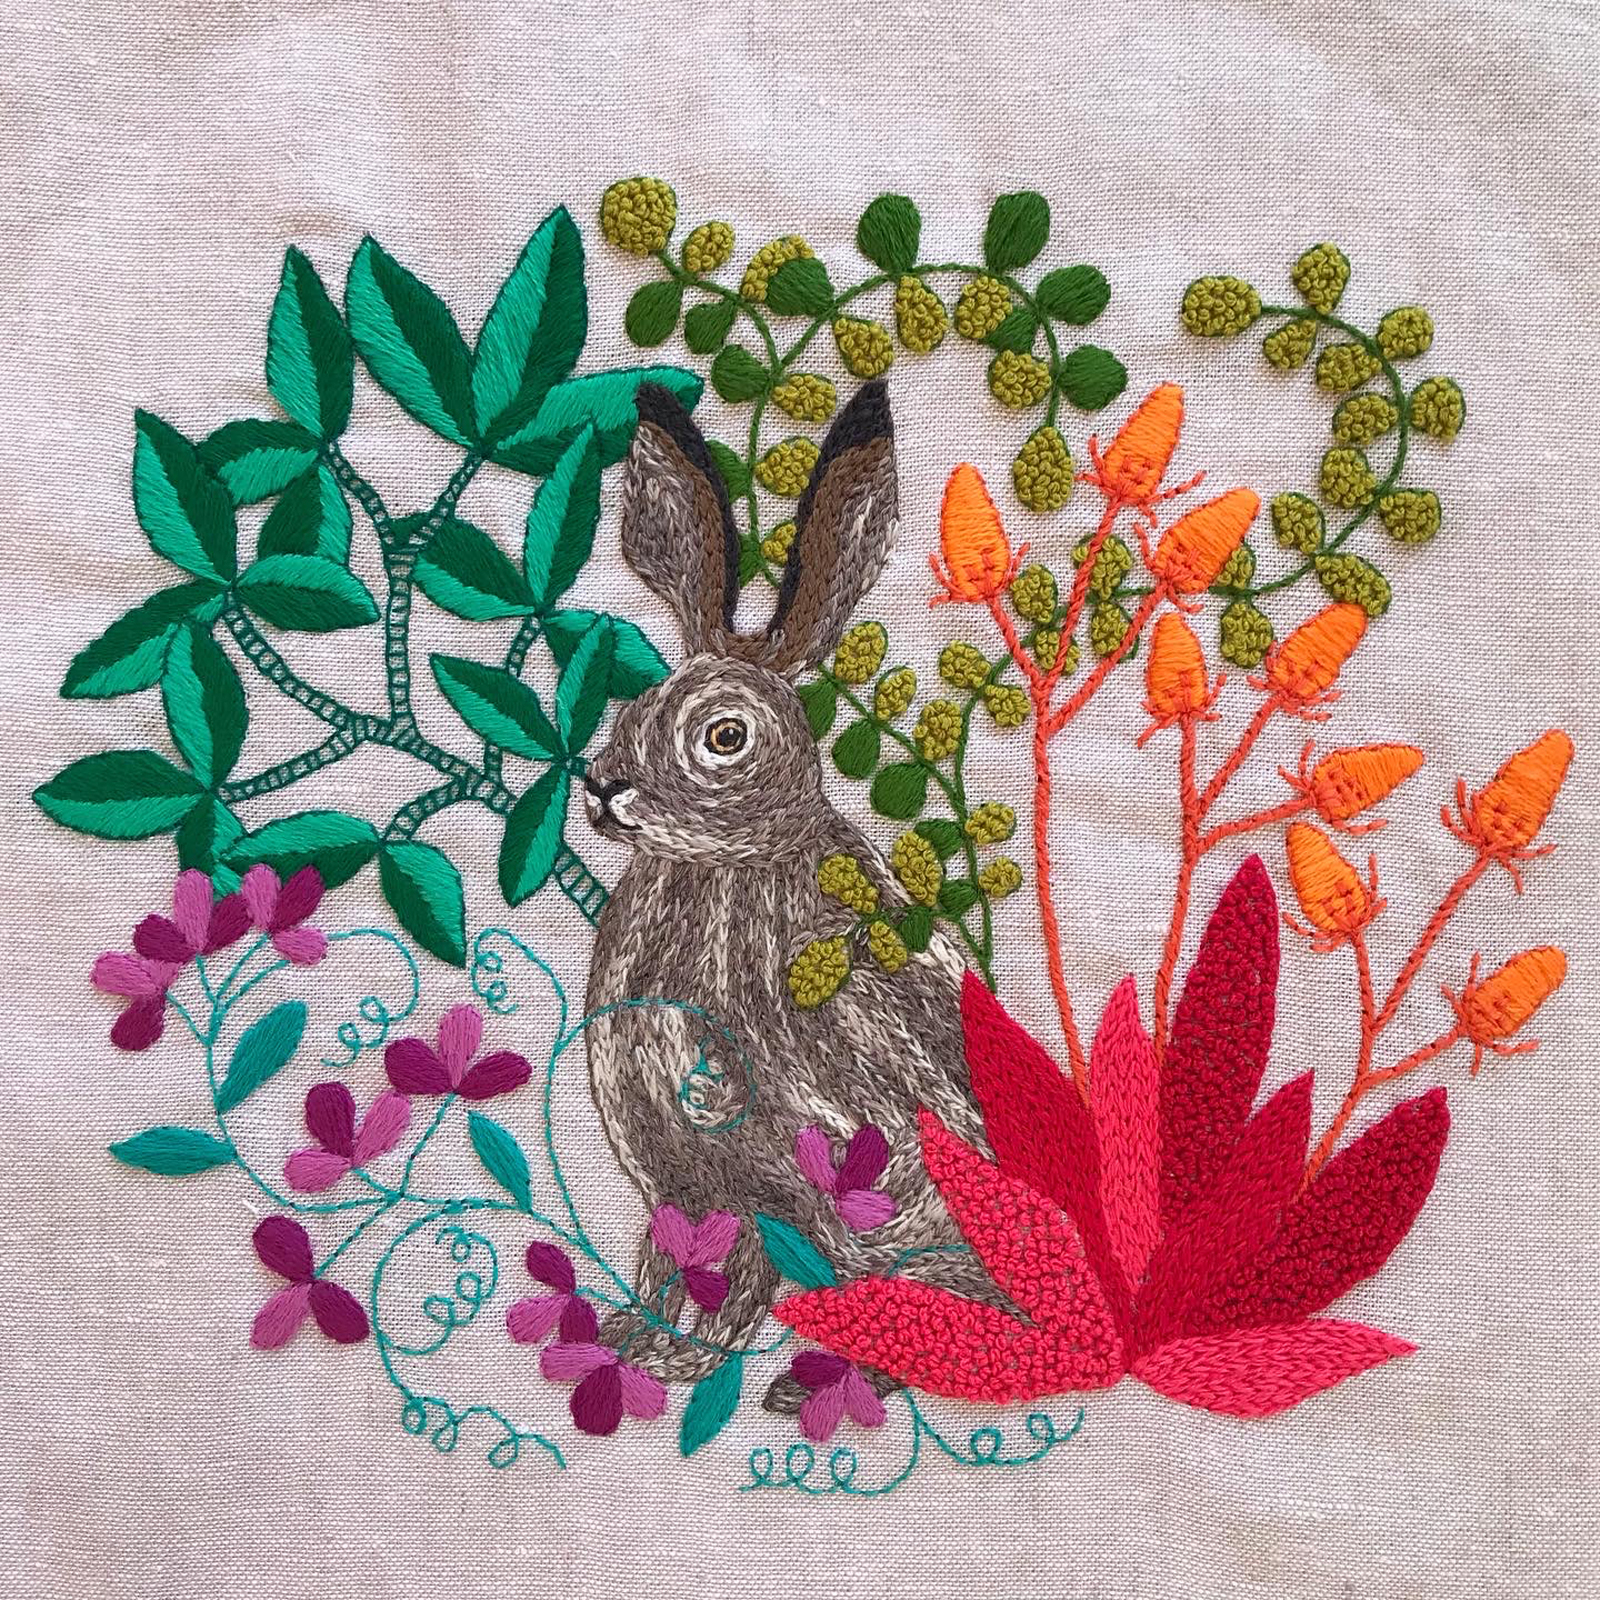 Inside the Year of the Rabbit Needlebook